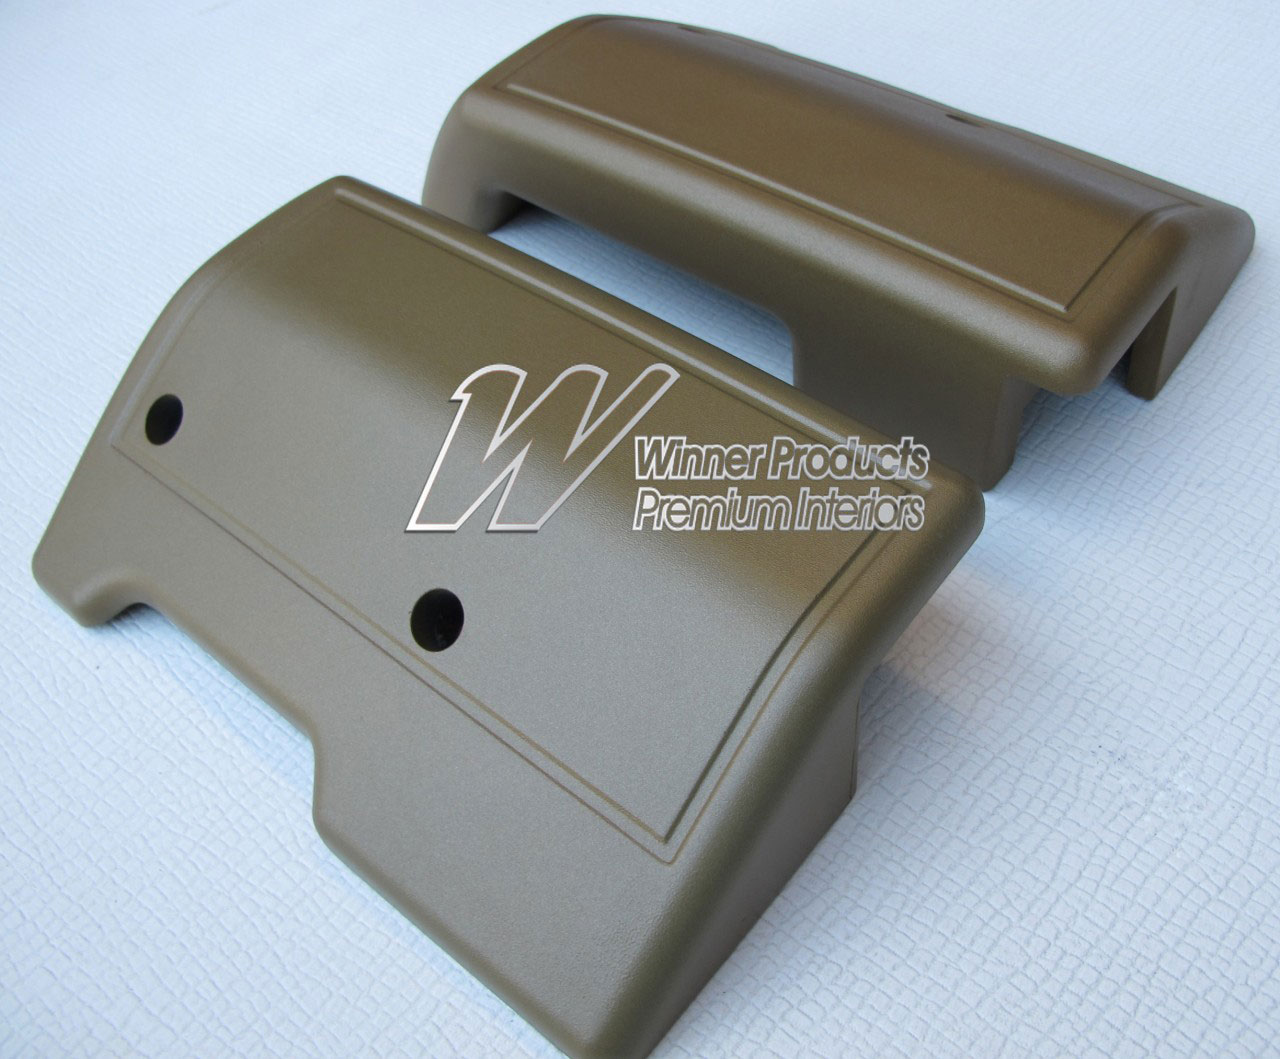 Holden Monaro HT Monaro Coupe 11X Antique Gold Arm Rests (Image 5 of 6)